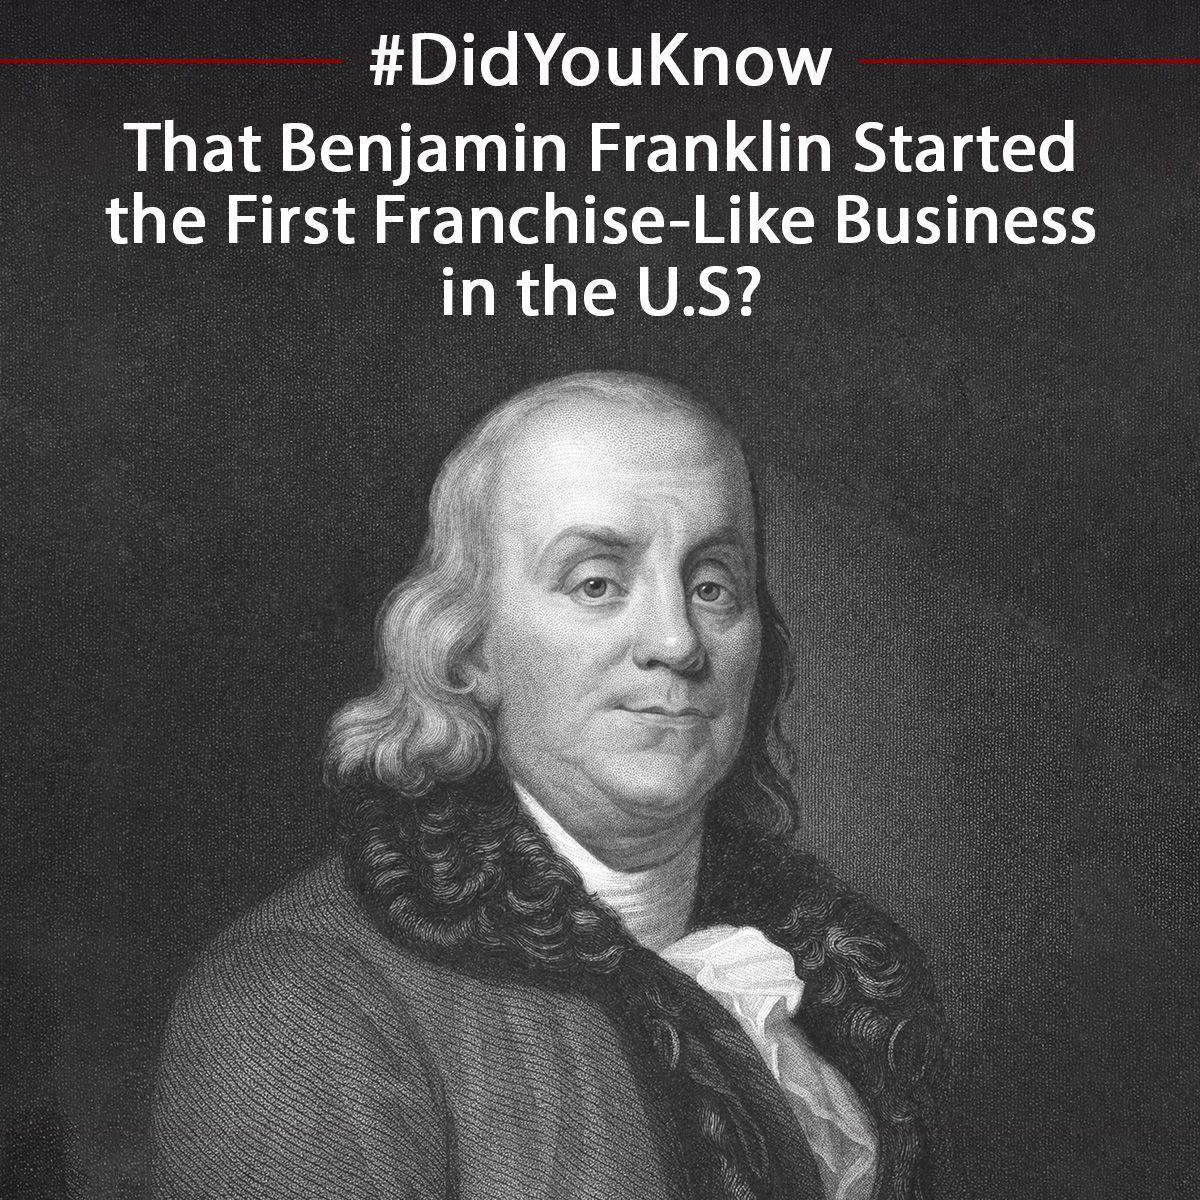 #DidYouKnow That Benjamin Franklin Started the First Franchise-Like Business in the U.S?